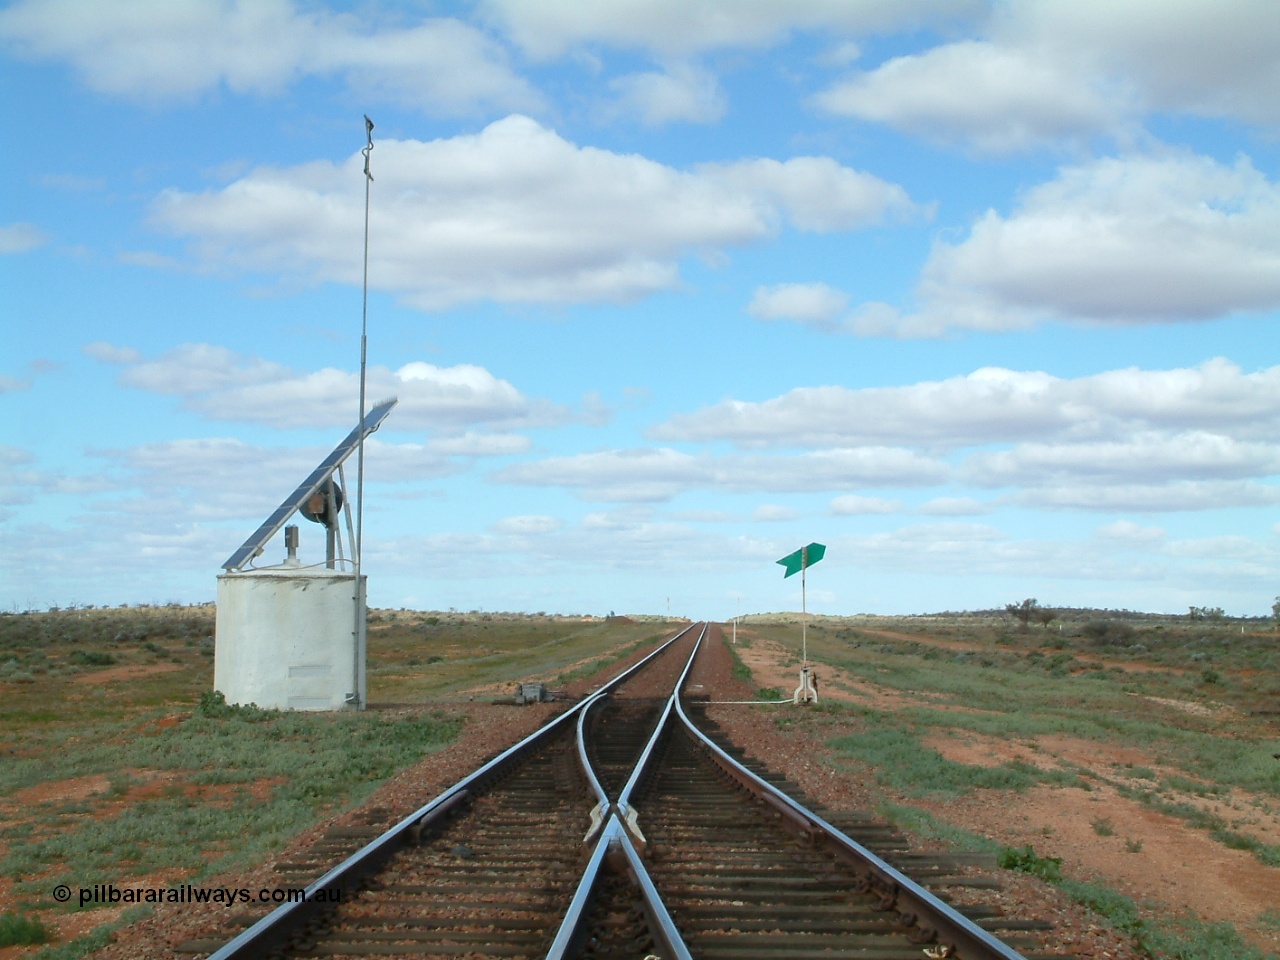 030415 150040
Ferguson, located at the 469 km on the Trans Australian Railway, looking east at the east end of the 1800 metre long crossing loop, point work on timber sleepers, interlocking hut with dual control point machine, indicator and lever on the right. [url=https://goo.gl/maps/XNaMGCNxZ4yv7Lrr9]GeoData location[/url].
